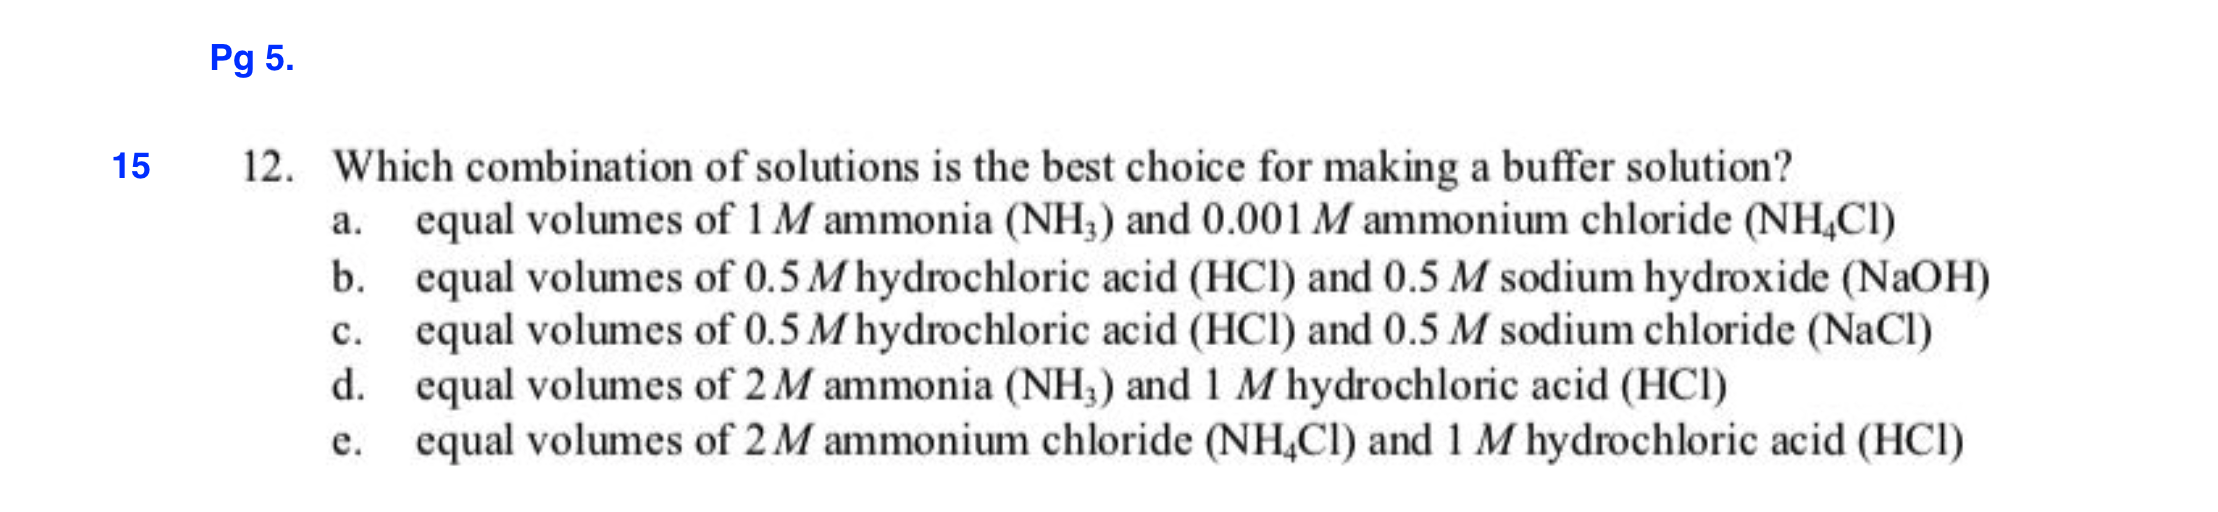 Pg 5.
12. Which combination of solutions is the best choice for making a buffer solution?
15
equal volumes of 1 M ammonia (NH) and 0.001 M ammonium chloride (NHCI)
equal volumes of 0.5 M hydrochloric acid (HCl) and 0.5 M sodium hydroxide (NaOH)
equal volumes of 0.5 M hydrochloric acid (HCl) and 0.5 M sodium chloride (NaCl)
equal volumes of 2M ammonia (NH) and 1 M hydrochloric acid (HCI)
equal volumes of 2 M ammonium chloride (NH,CI) and 1 M hydrochloric acid (HCI)
а.
b.
с.
d.
е.
